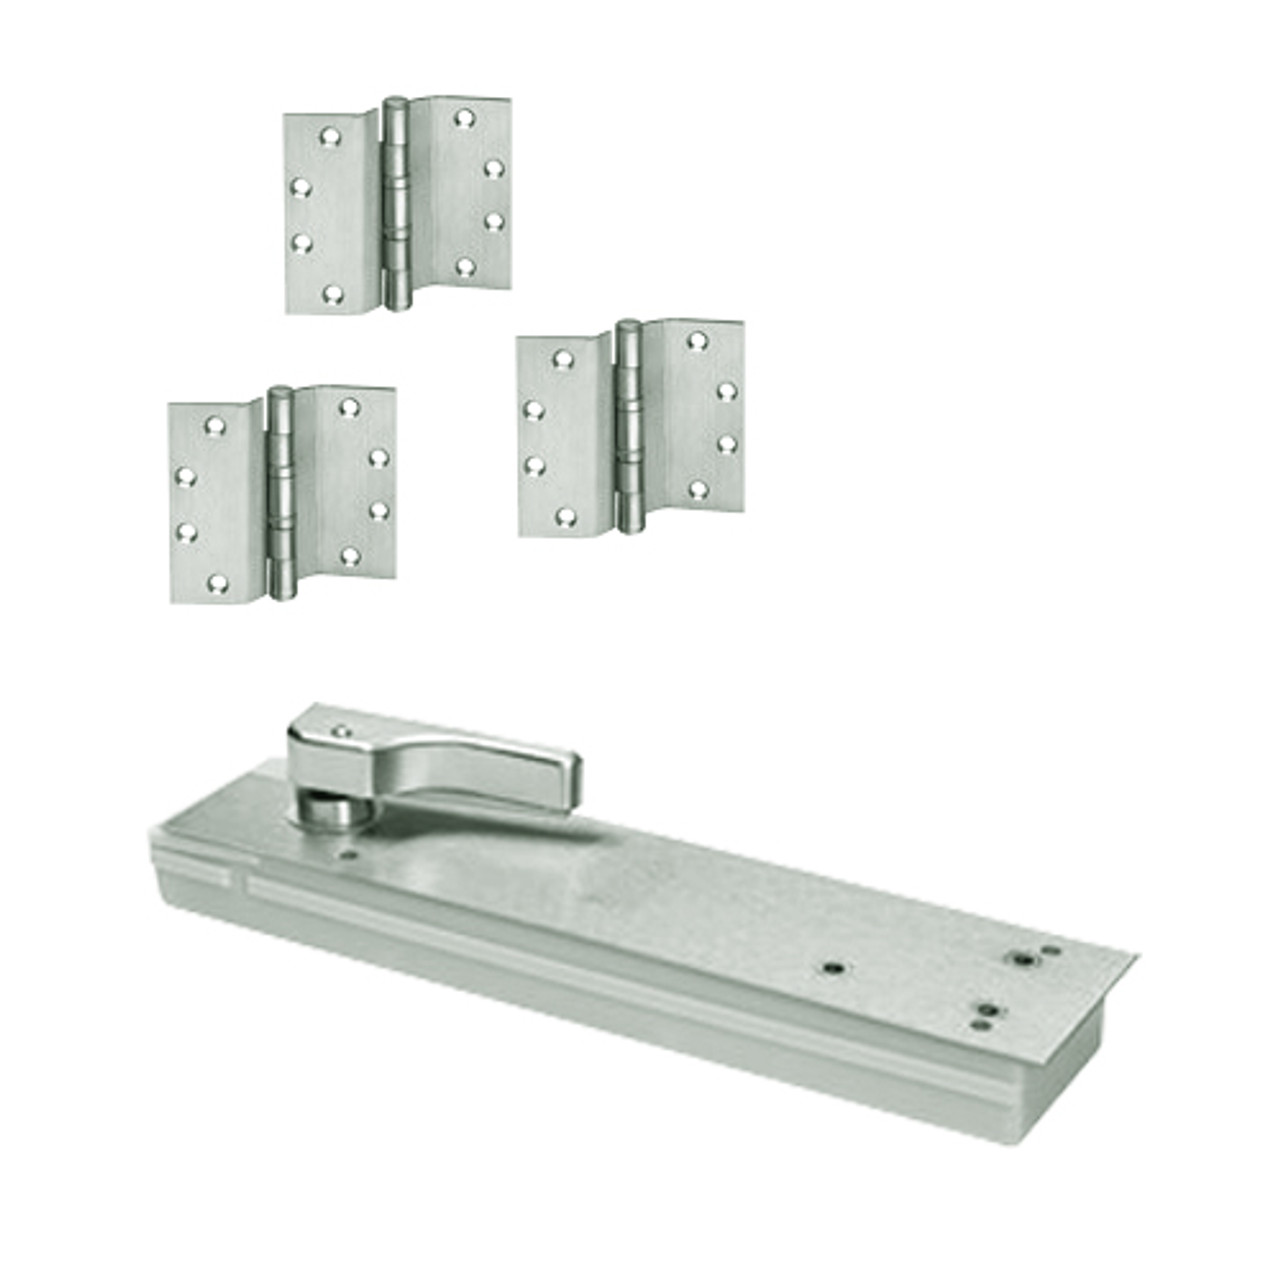 HM5105NBC-RH-618 Rixson HM51 Series 3/4" Offset Hung Shallow Depth Floor Closers in Bright Nickel Finish